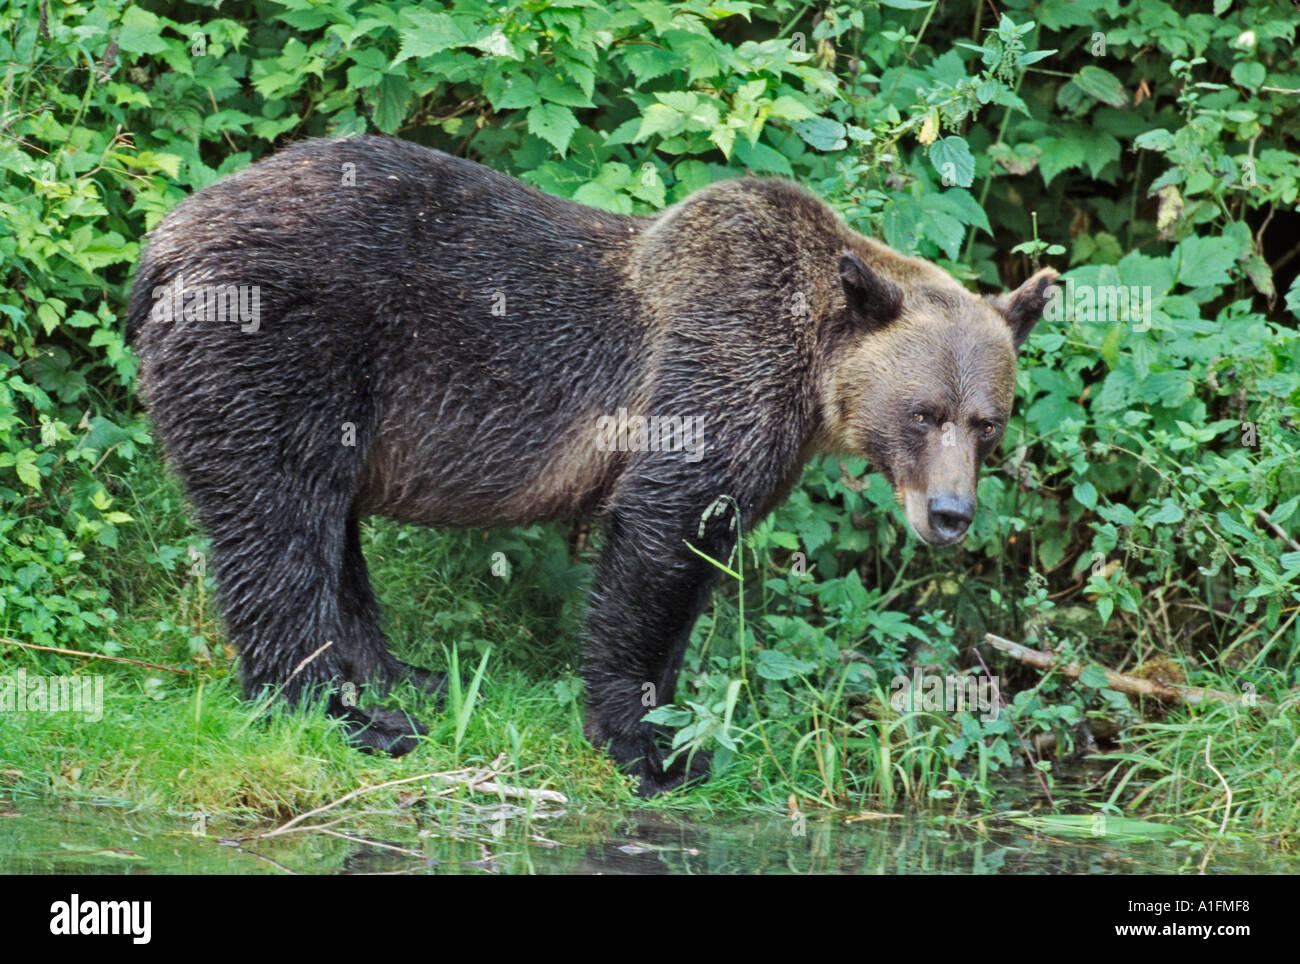 Grizzly bear at edge of forest- Hyder Alaska Stock Photo